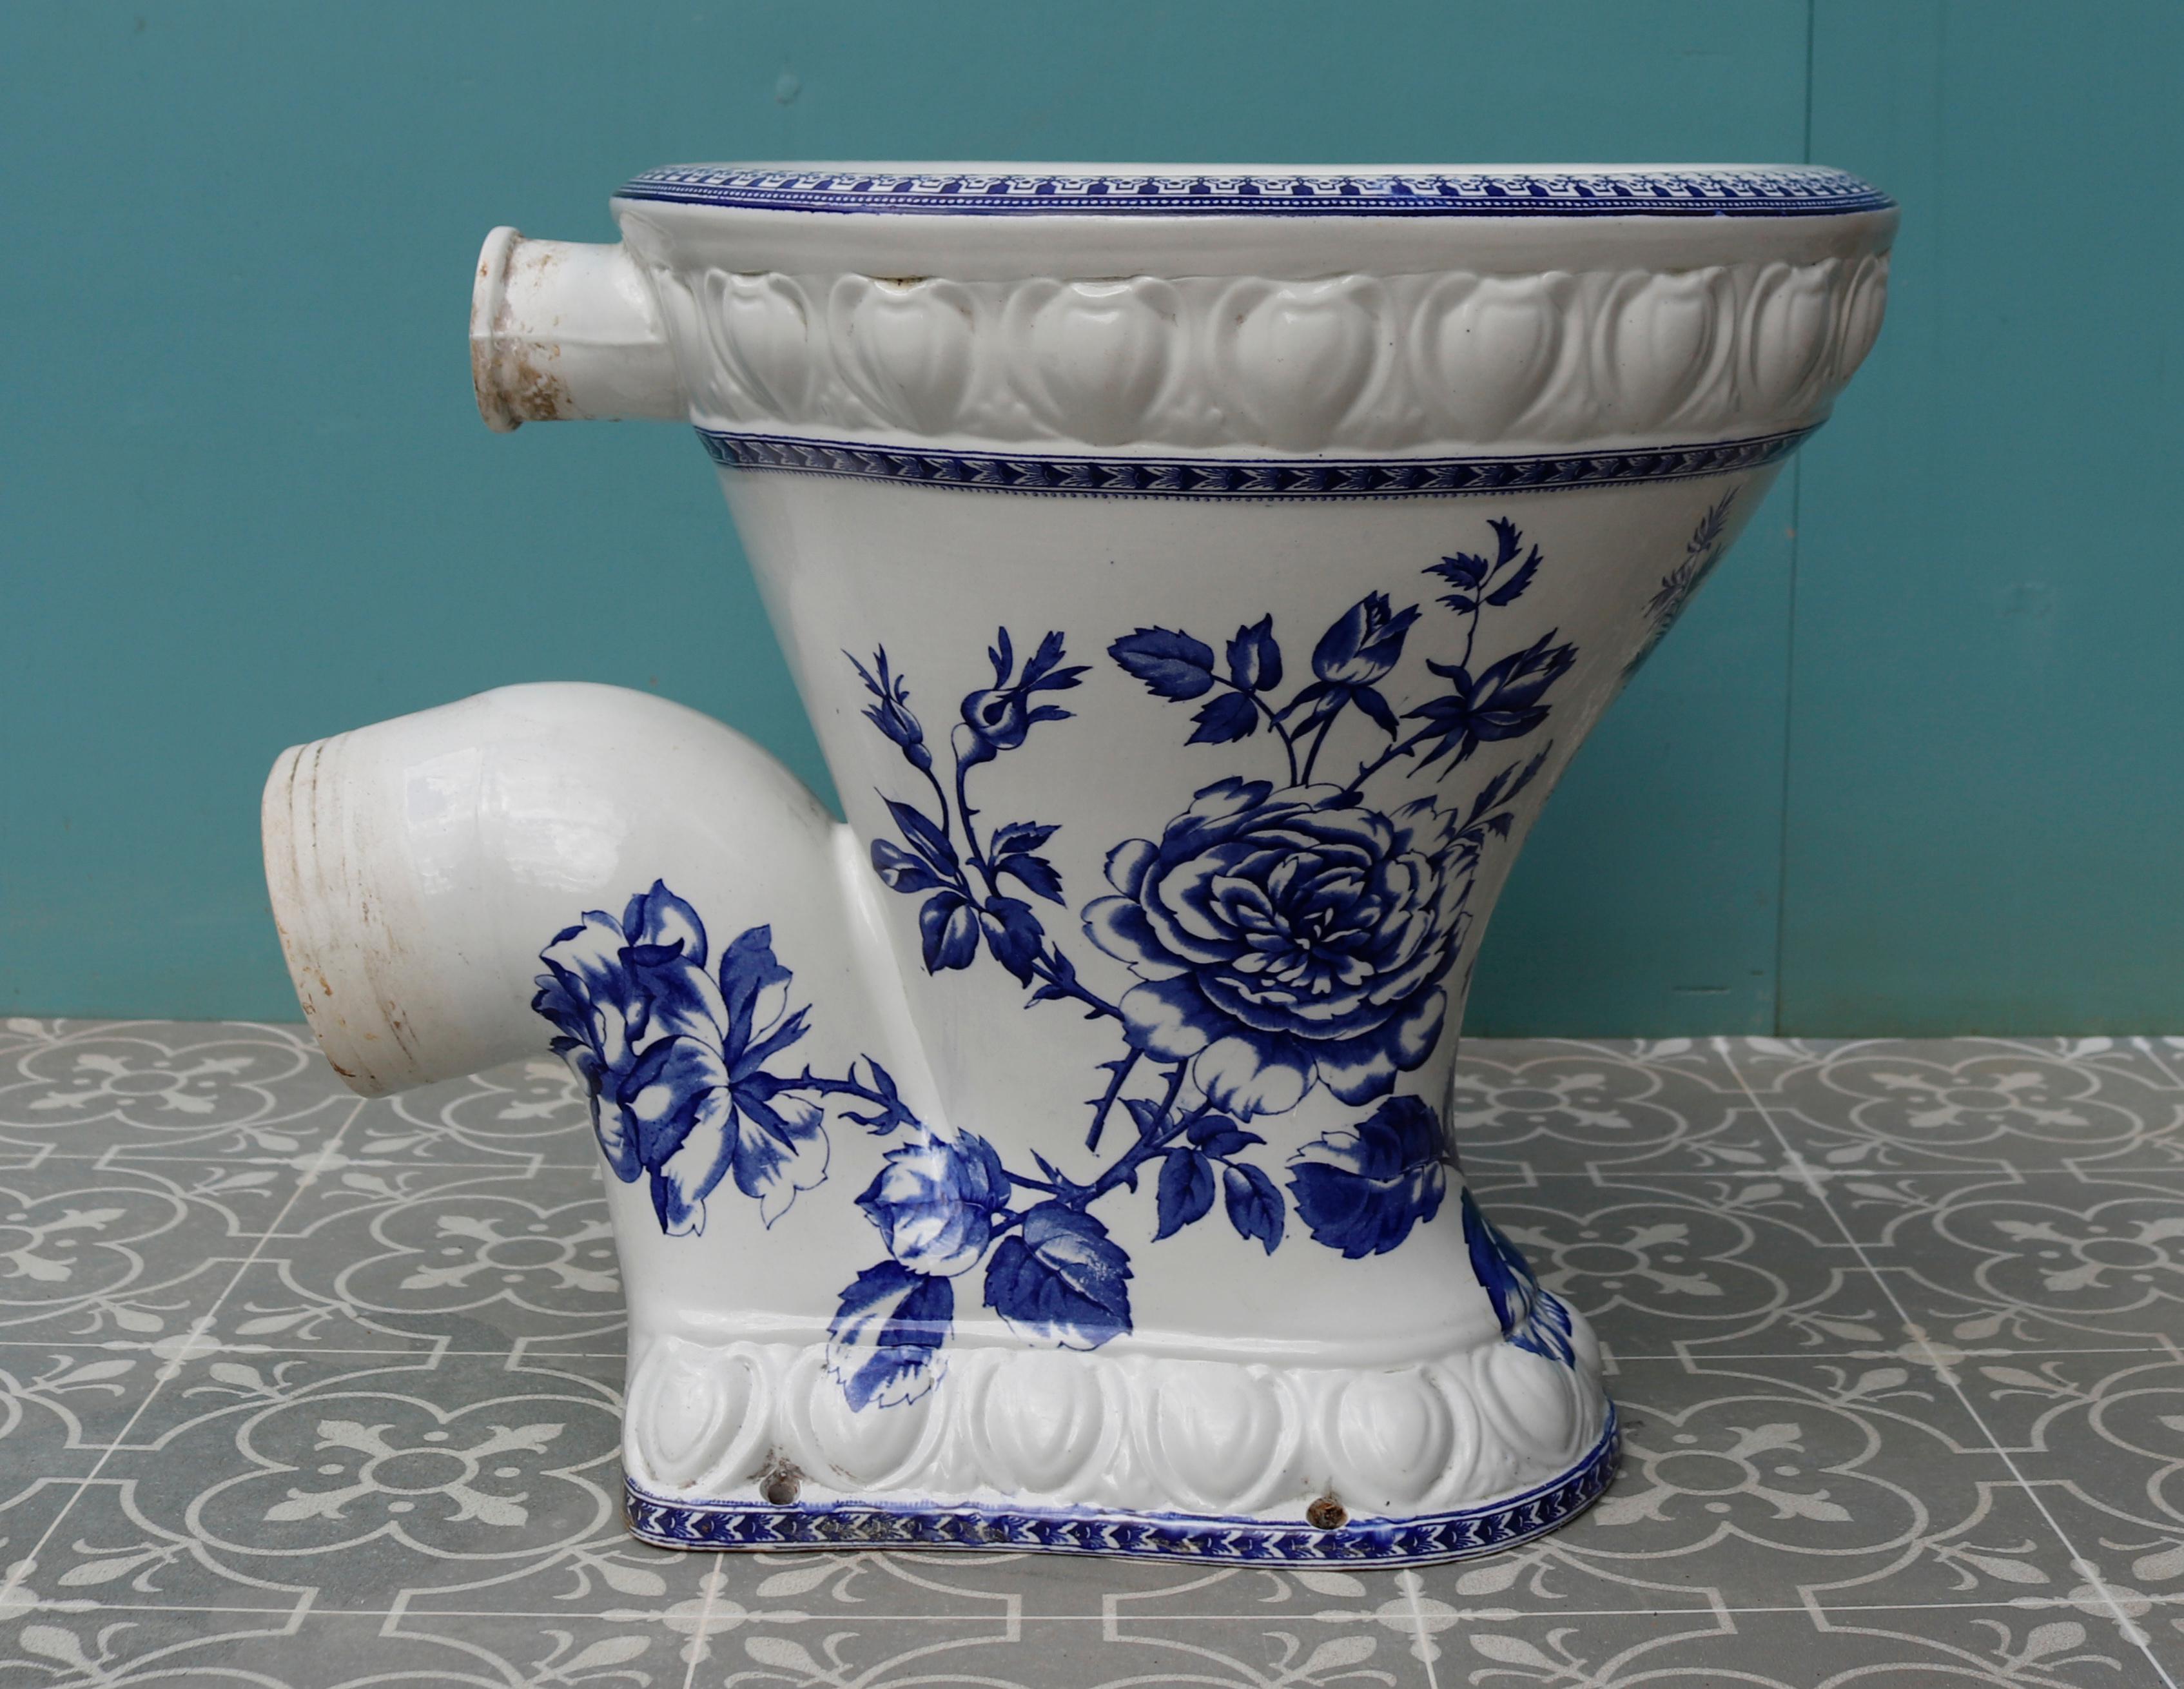 A reclaimed toilet with a blue and white transfer pattern called ‘The City’. This is a P-Trap model.